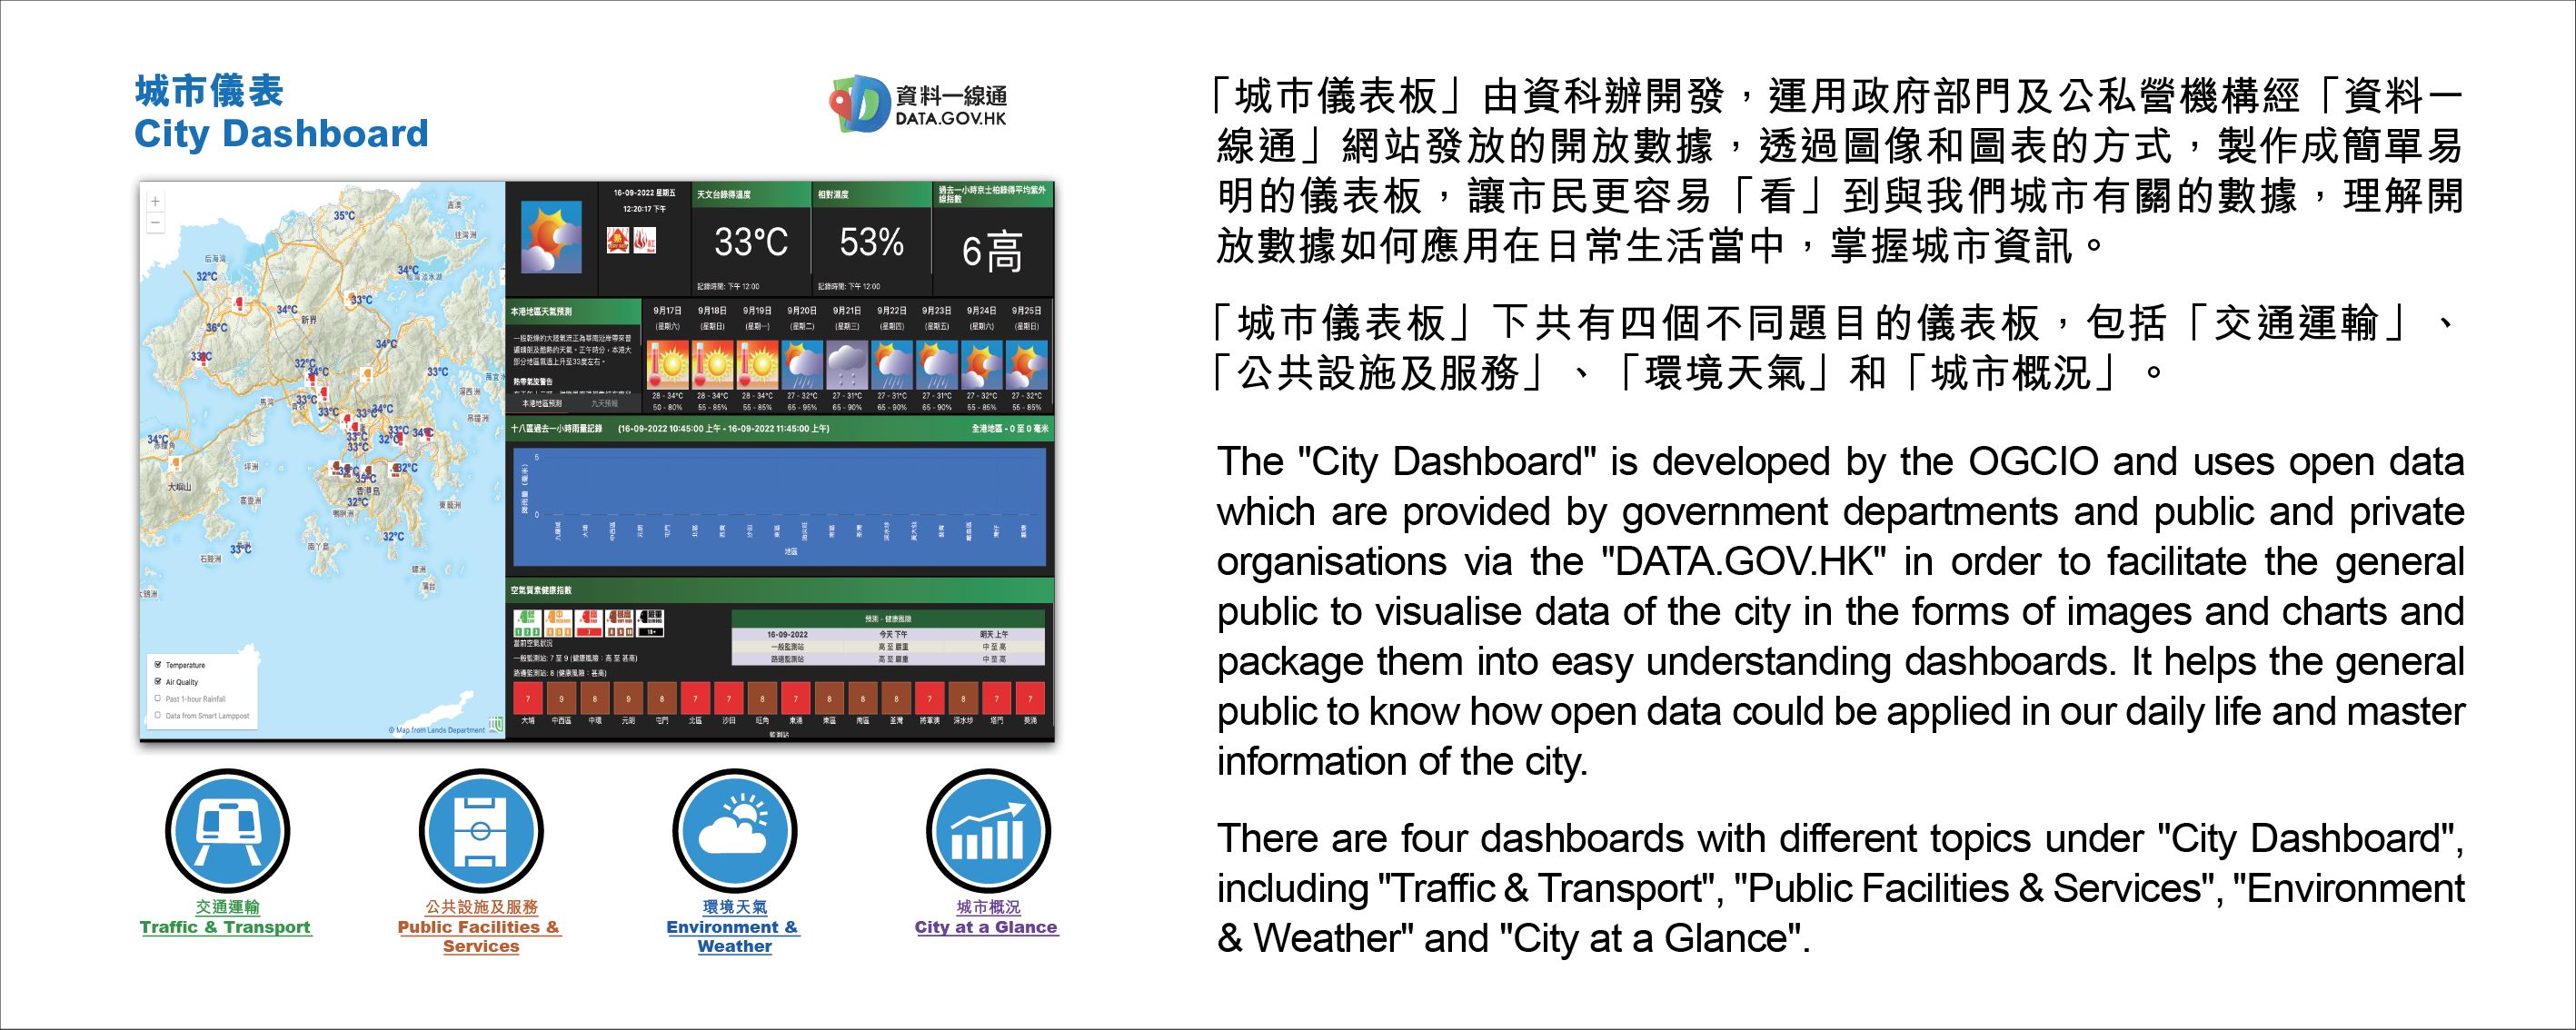 The "City Dashboard" is developed by the OGCIO and uses open data which are provided by government departments and public and private organisations via the "DATA.GOV.HK" in order to facilitate the general public to visualise data of the city in the forms of images and charts and package them into easy understanding dashboards. It helps the general public to know how open data could be applied in our daily life and master information of the city. There are four dashboards with different topics under "City Dashboard", including "Traffic & Transport", "Public Facilities & Services", "Environment & Weather" and "City at a Glance".